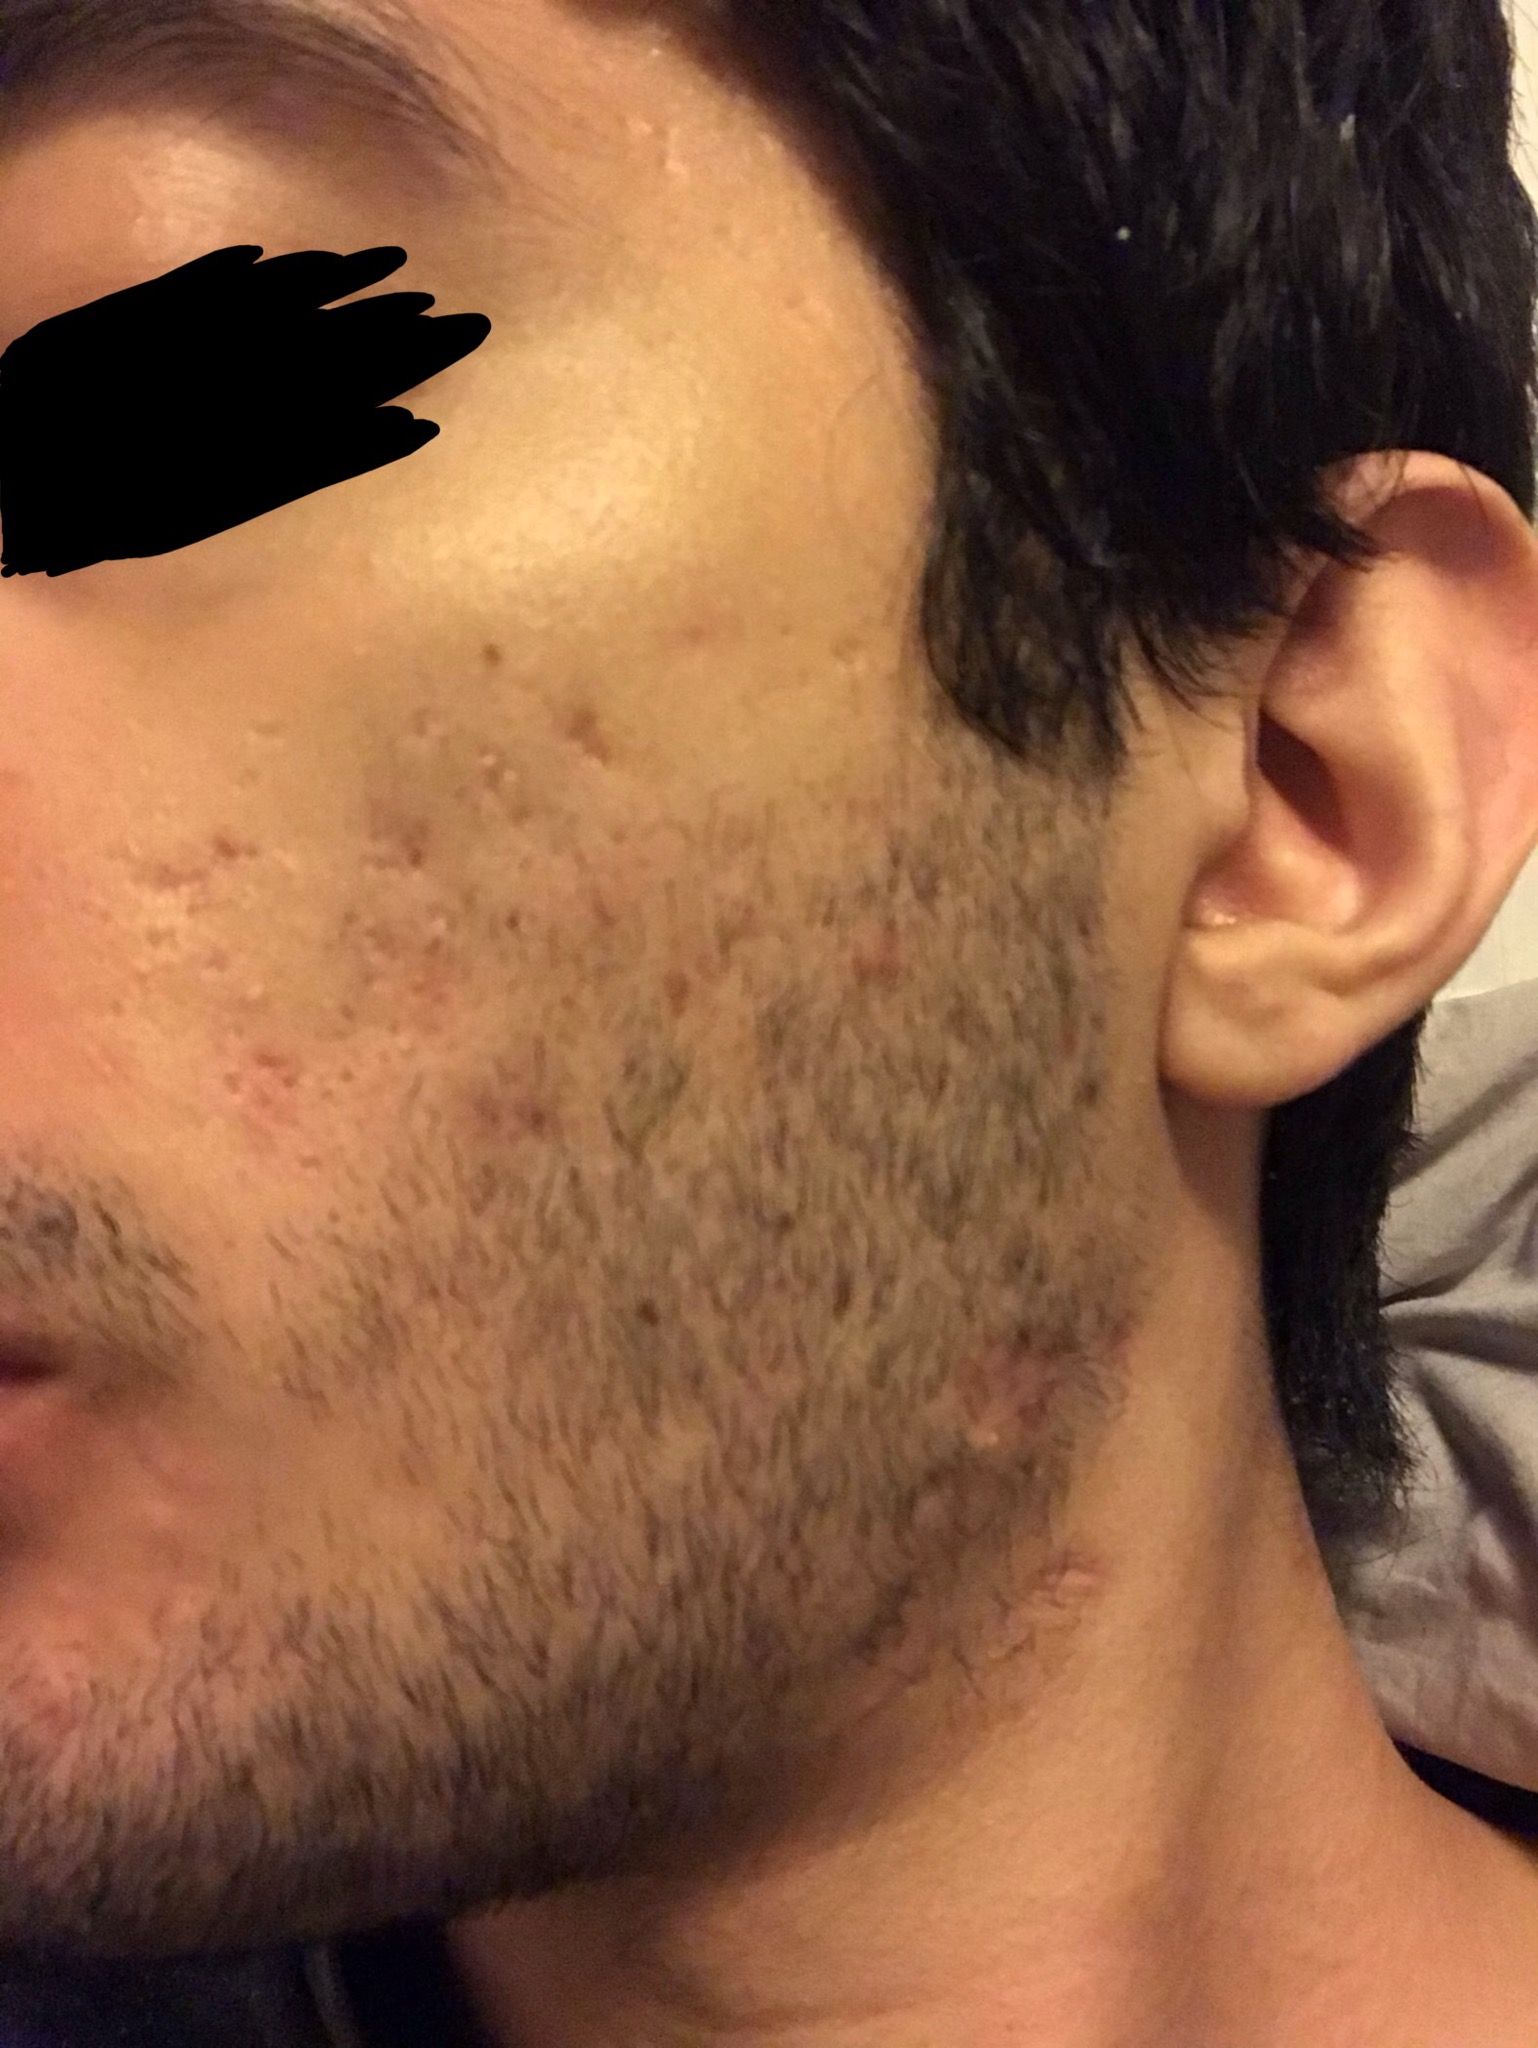 How severe is my acne scars? What to do about it? - Scar treatments